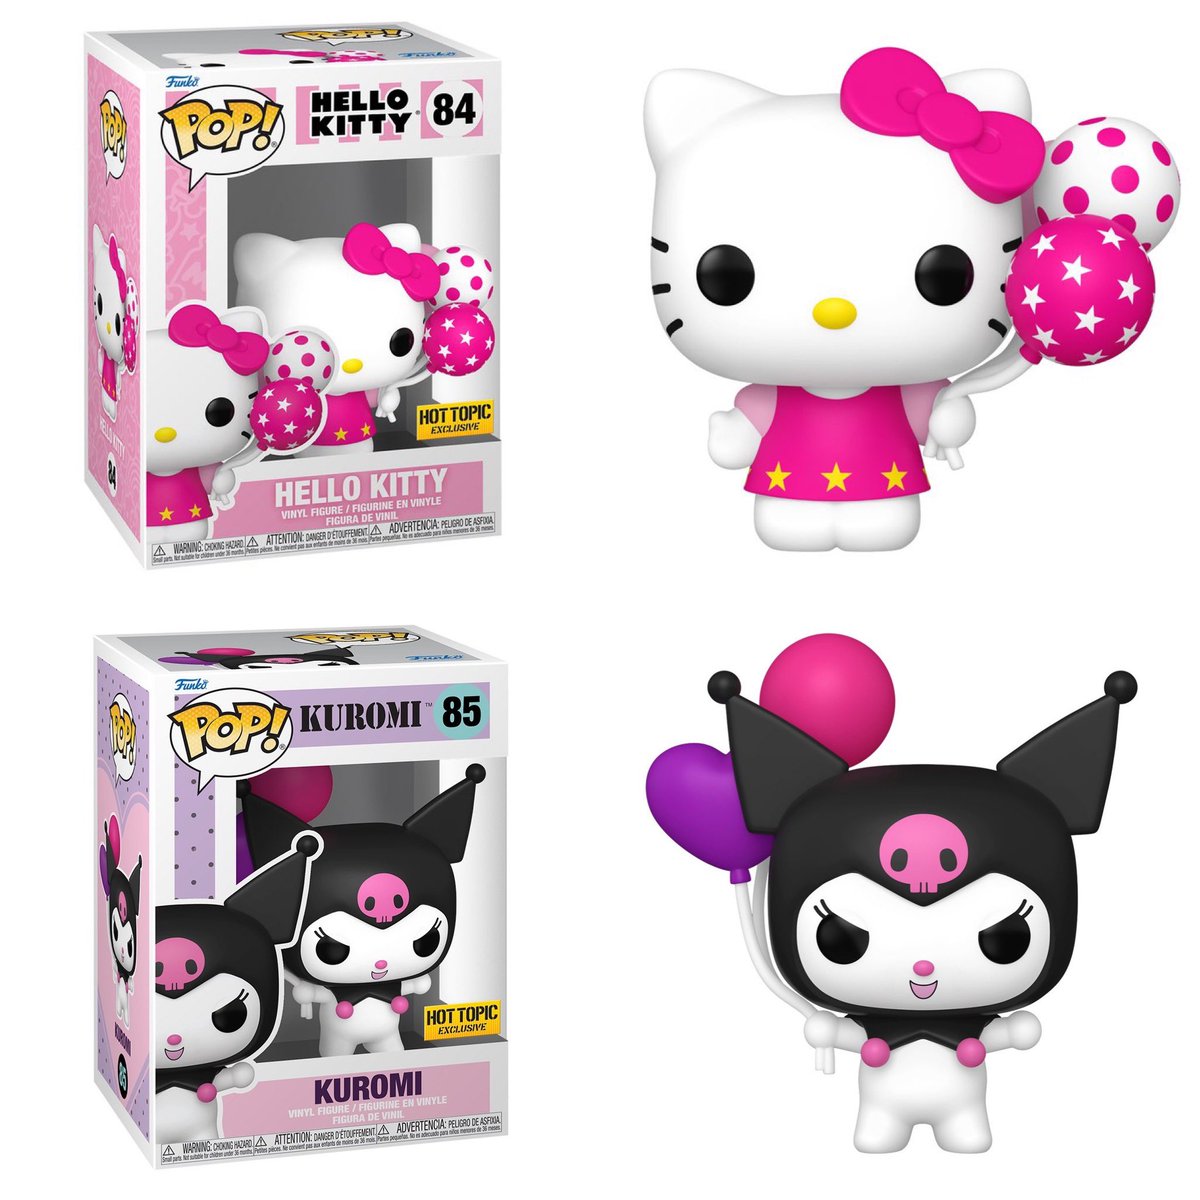 Full glams for the cute new Hot Topic exclusive Hello Kitty and Kuromi with Balloons! Should drop online soon ~ thanks @funkoinfo_ ~ #Sanrio #Kuromi #HelloKitty  #FPN #FunkoPOPNews #Funko #POP #POPVinyl #FunkoPOP #FunkoSoda